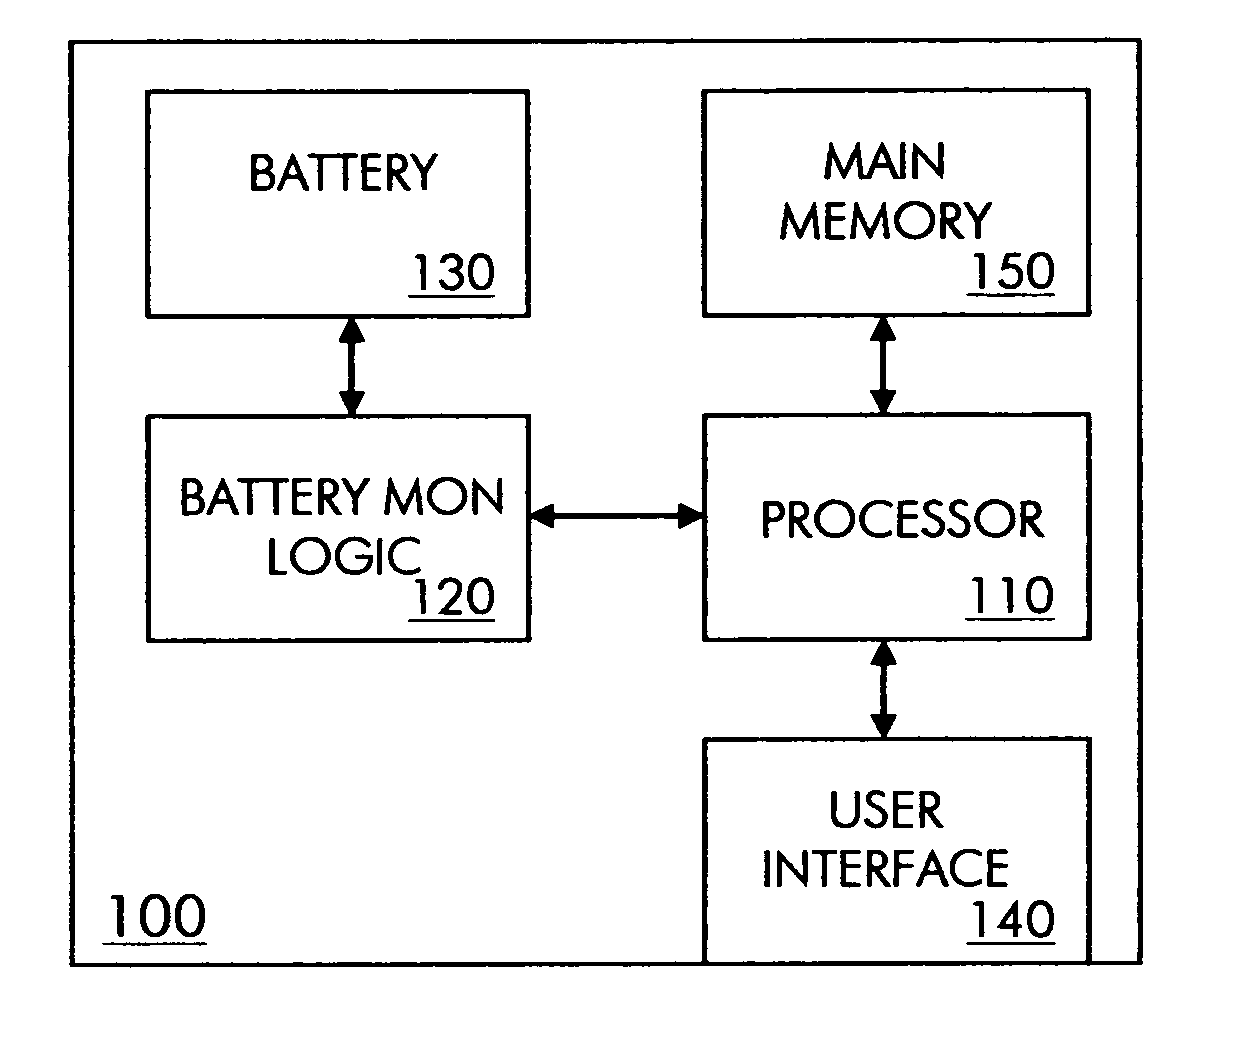 Virtual batteries for wireless communication device